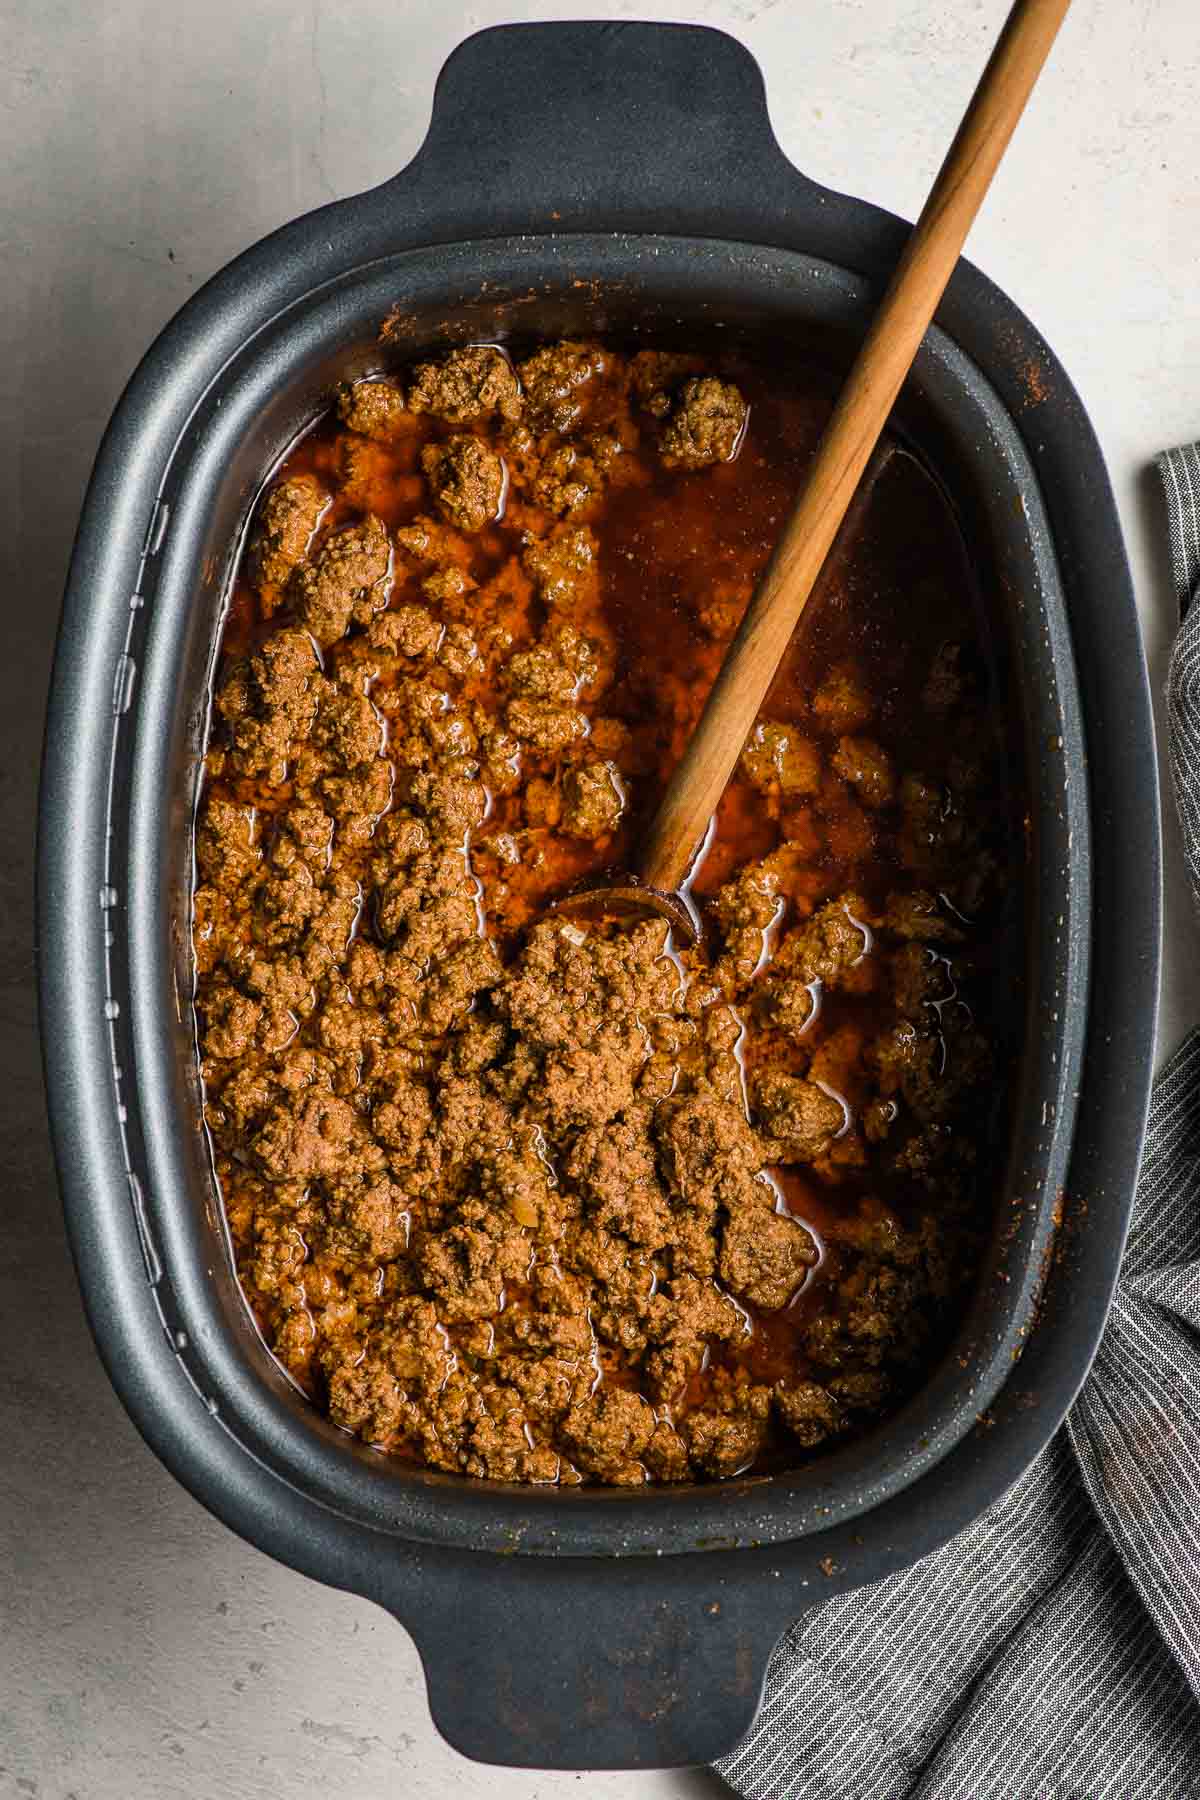 A crock pot full of slow cooker taco meat.